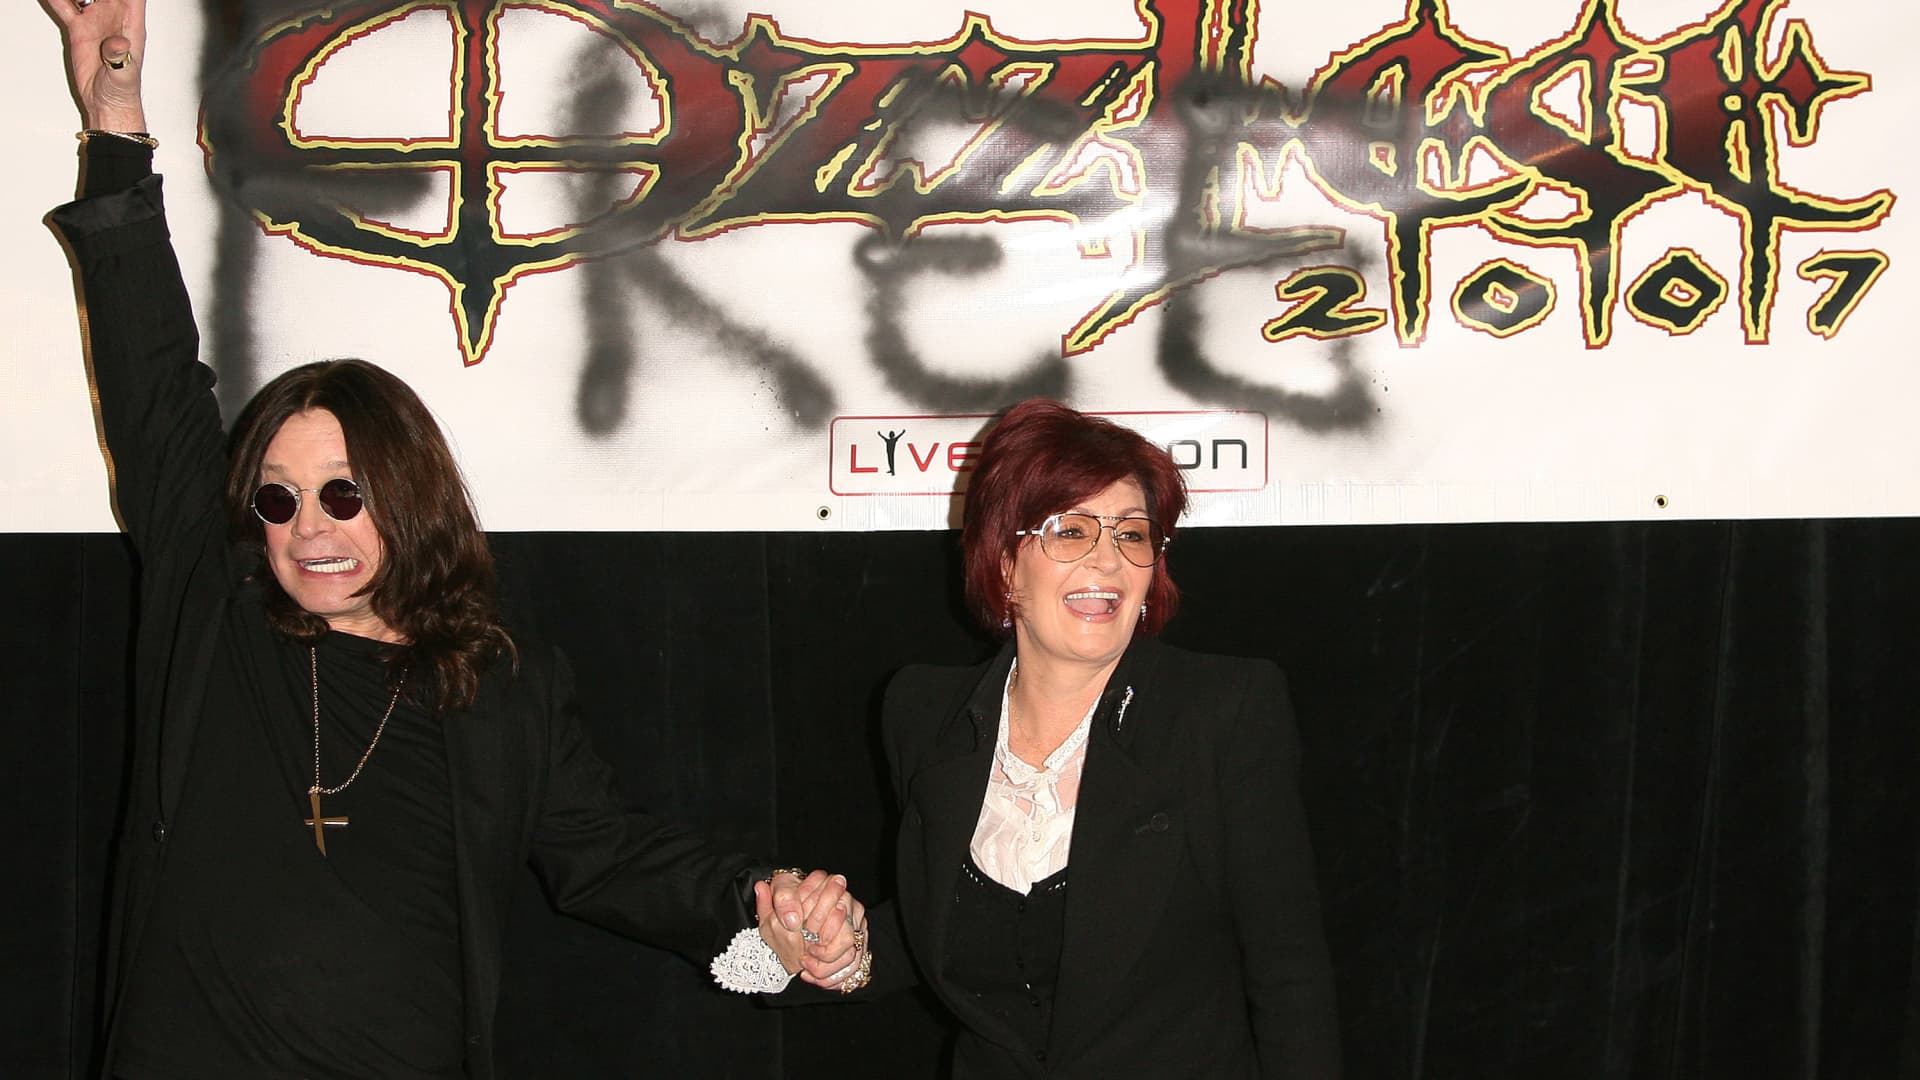 Ozzy Osbourne and Sharon Osbourne announce that Ozzfest 2007 will be free. The announcement was made during a press conference at the Century Plaza hotel in Los Angeles, California on February 6, 2007.